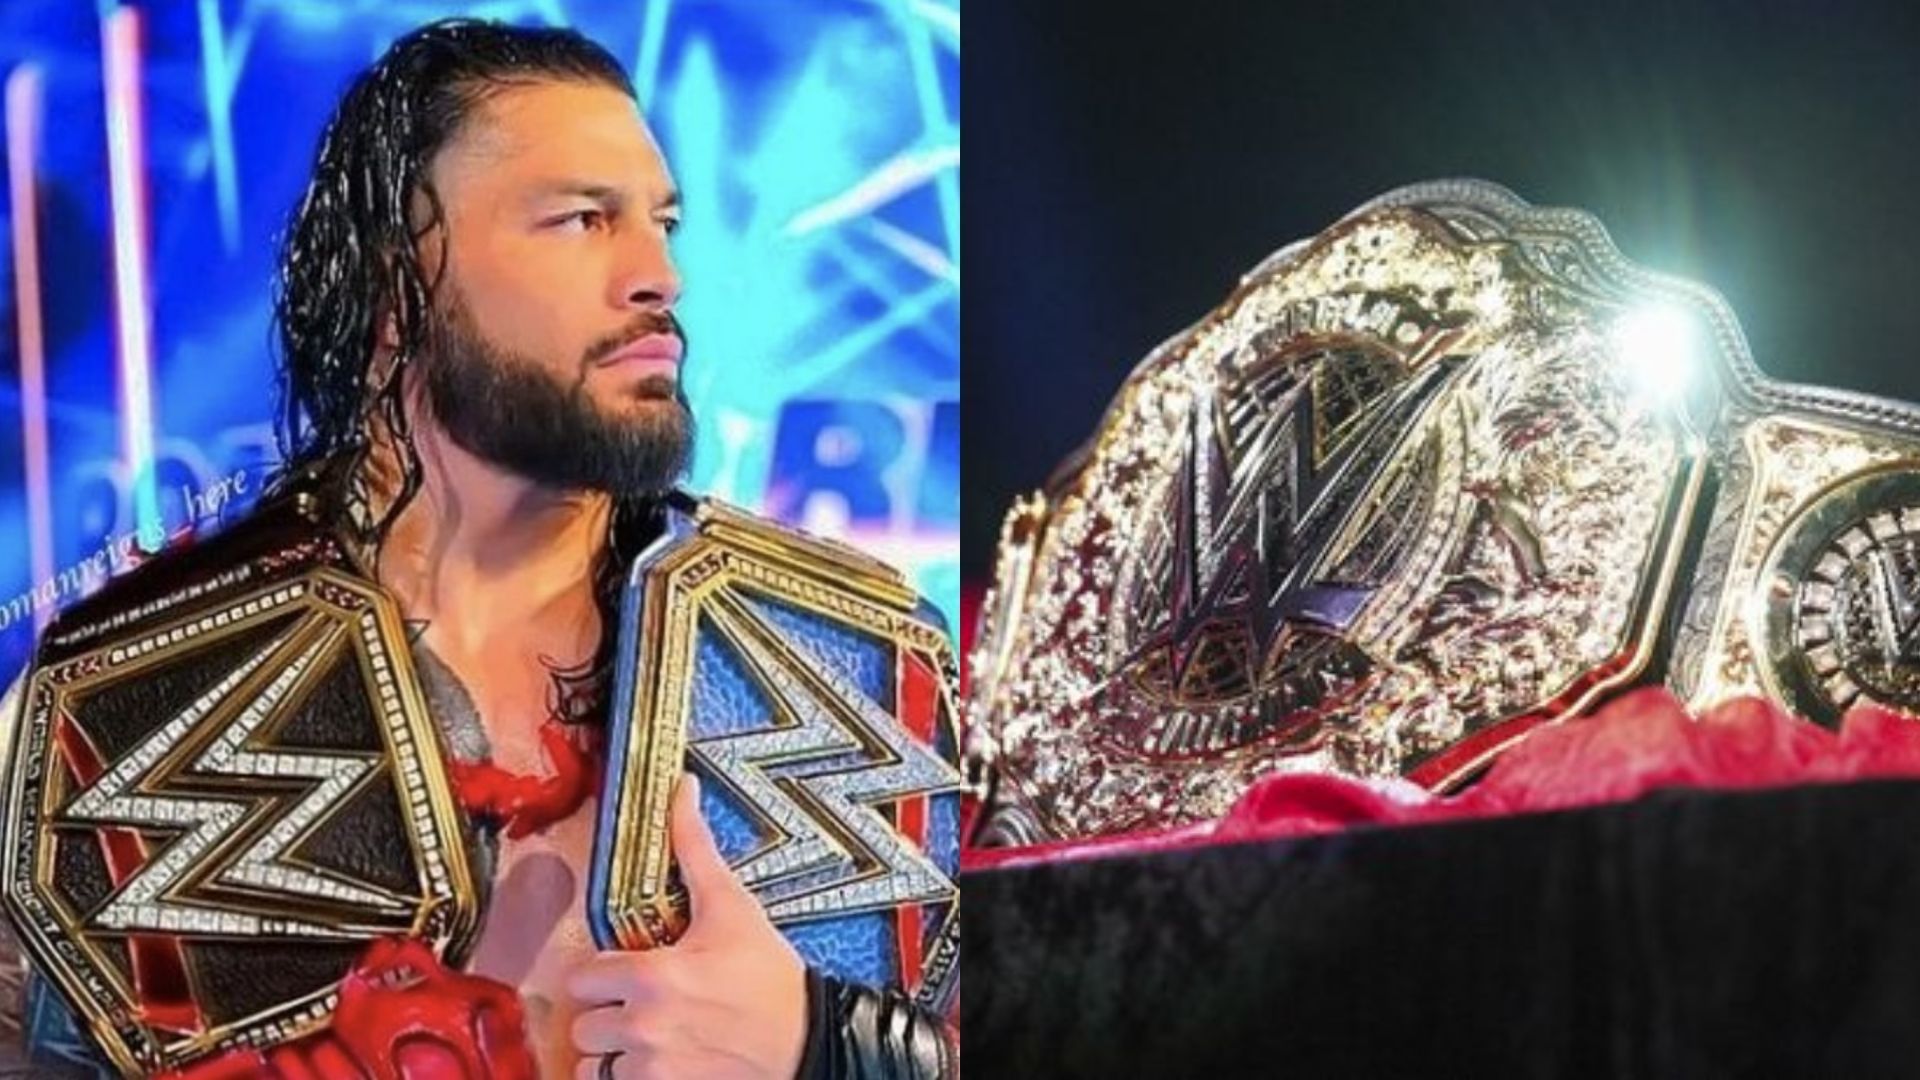 Will Roman Reigns look to win the WWE World Heavyweight Championship?